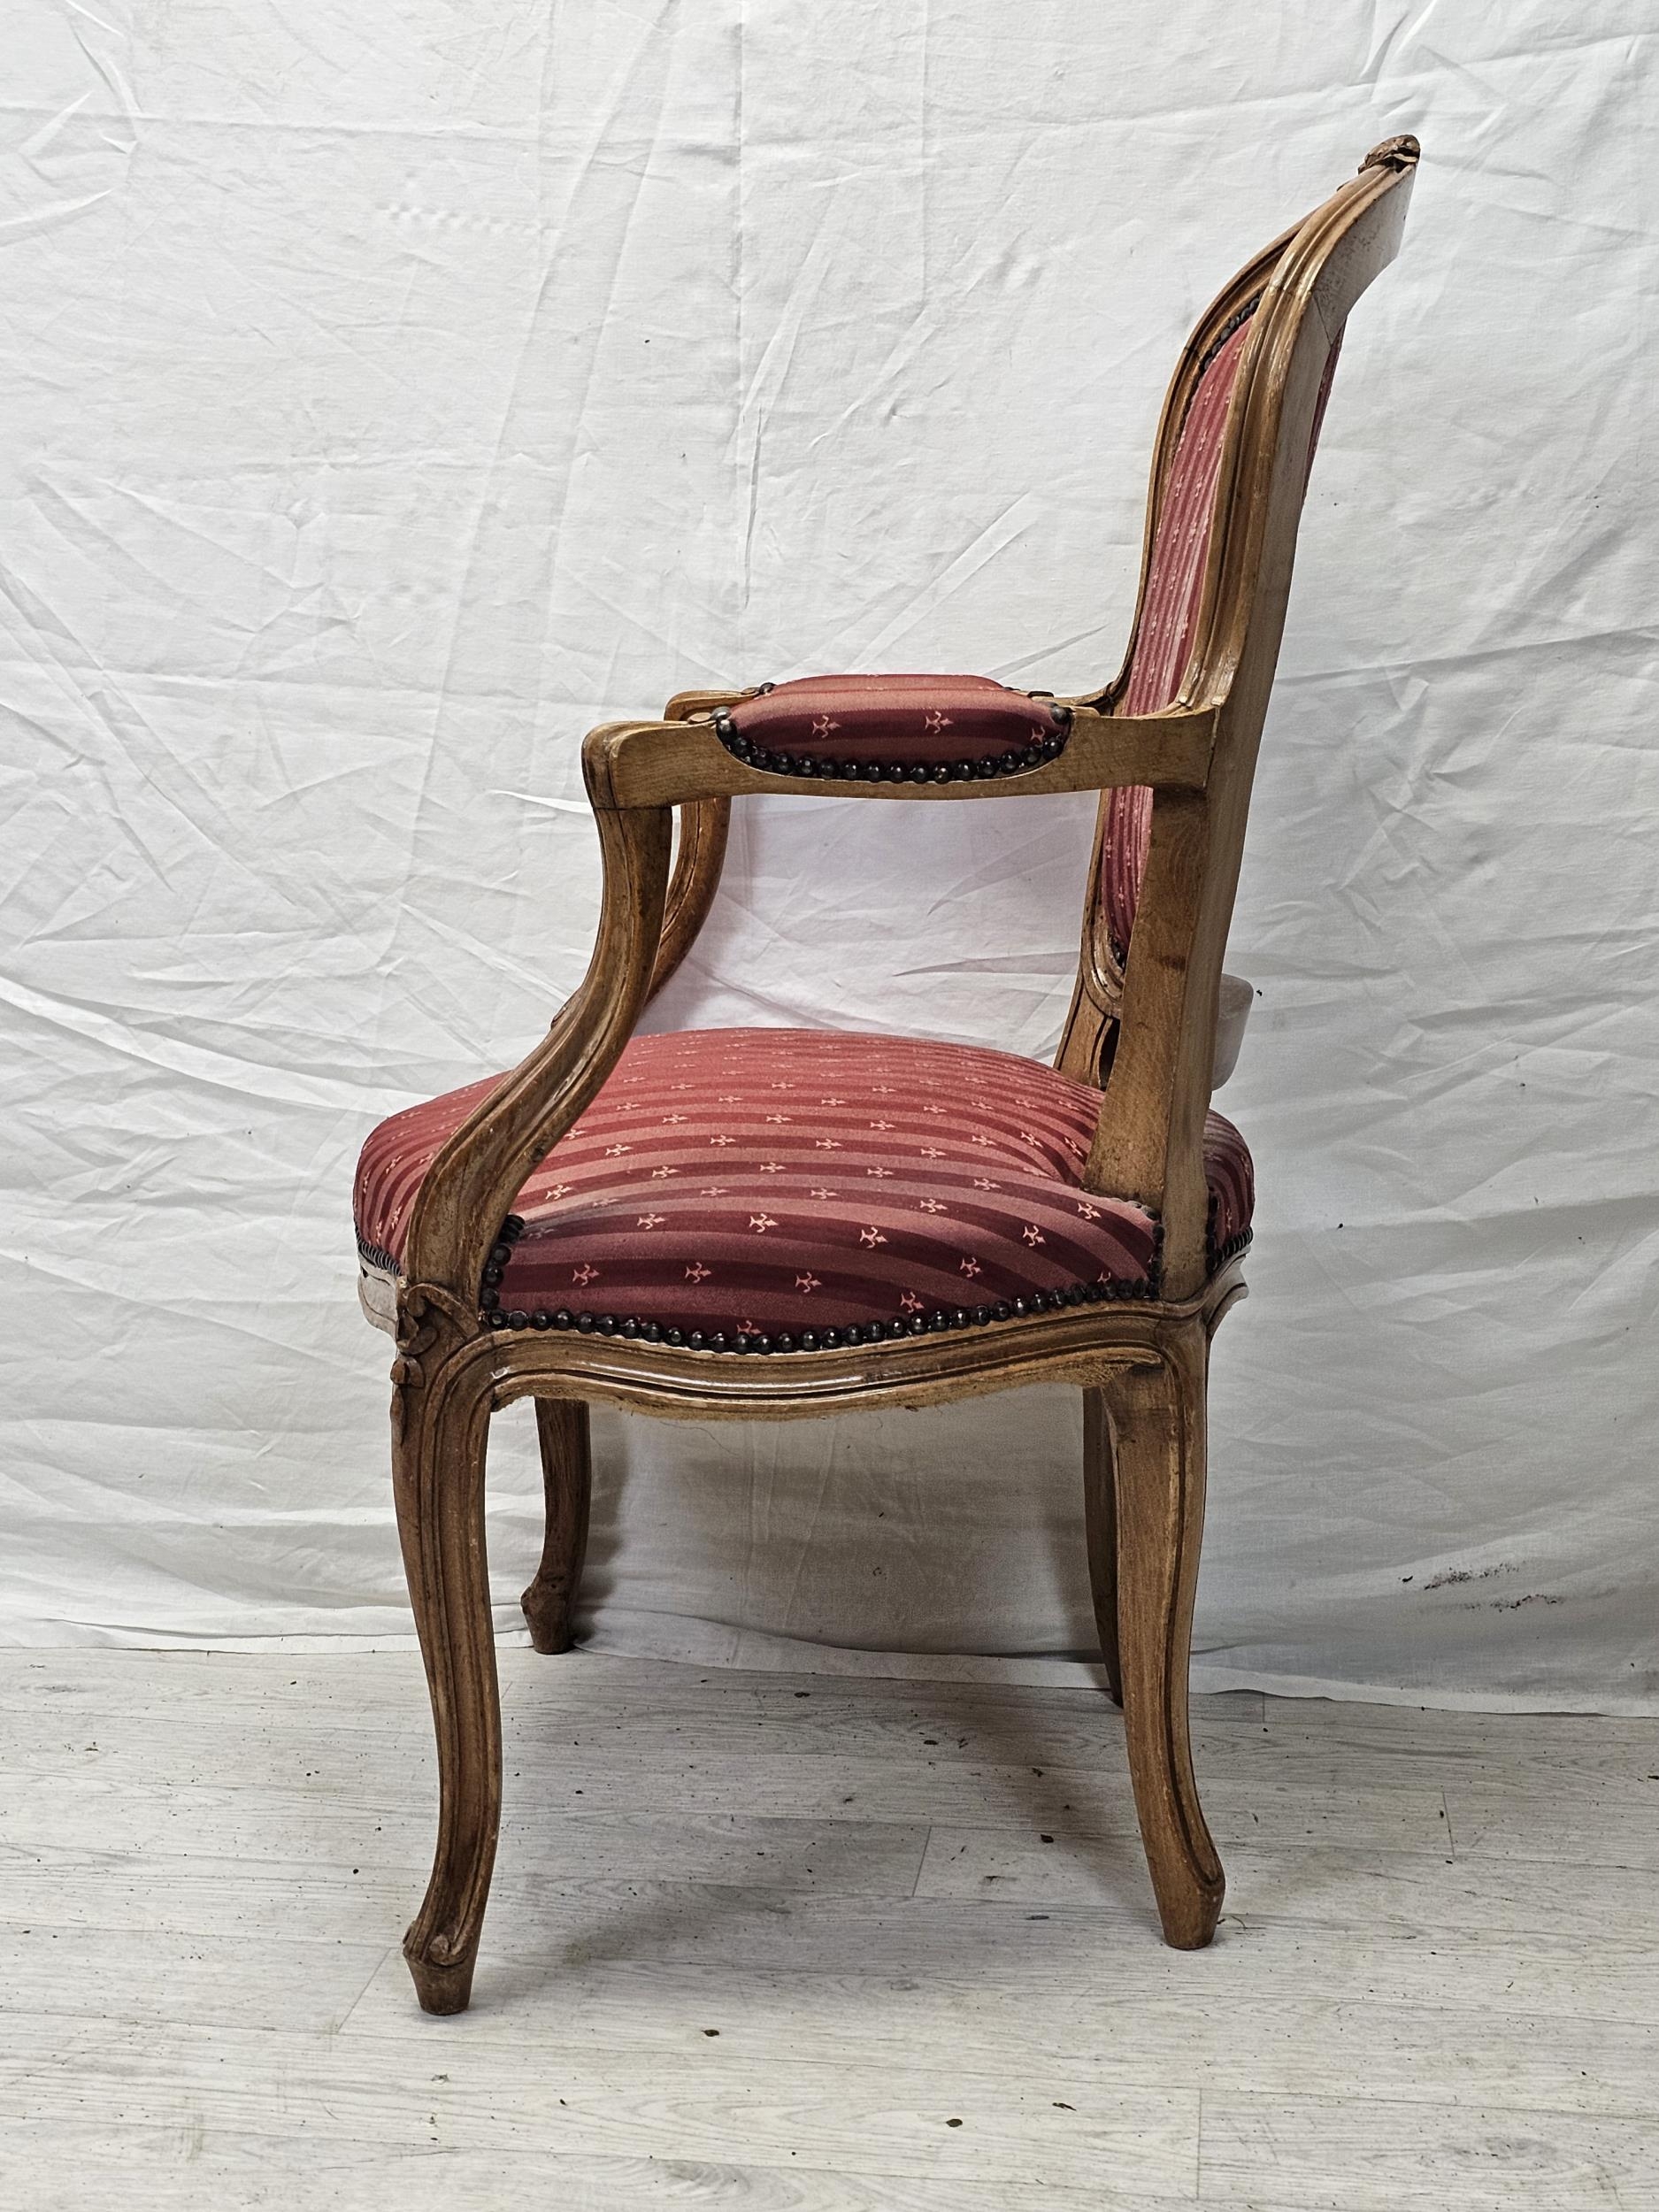 Armchair, French 19th century Provincial style, carved beech. - Image 3 of 7